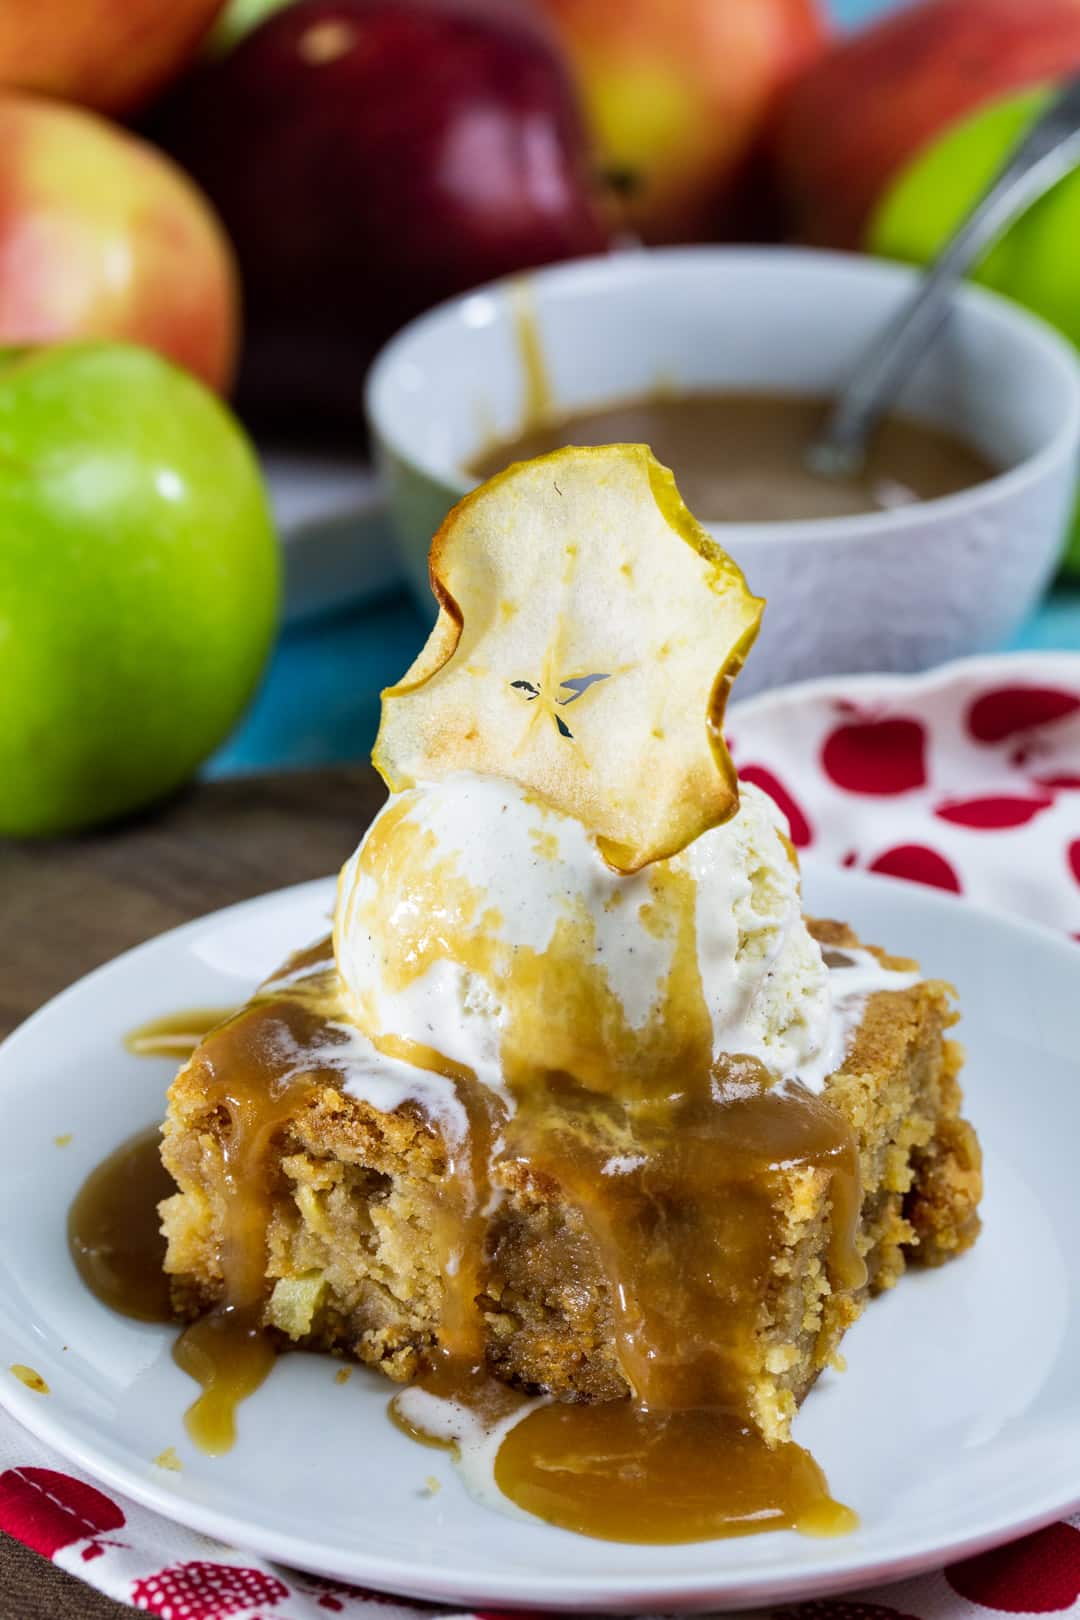 Butterscotch Apple Bar topped with ice cream and caramel sauce on a plate.